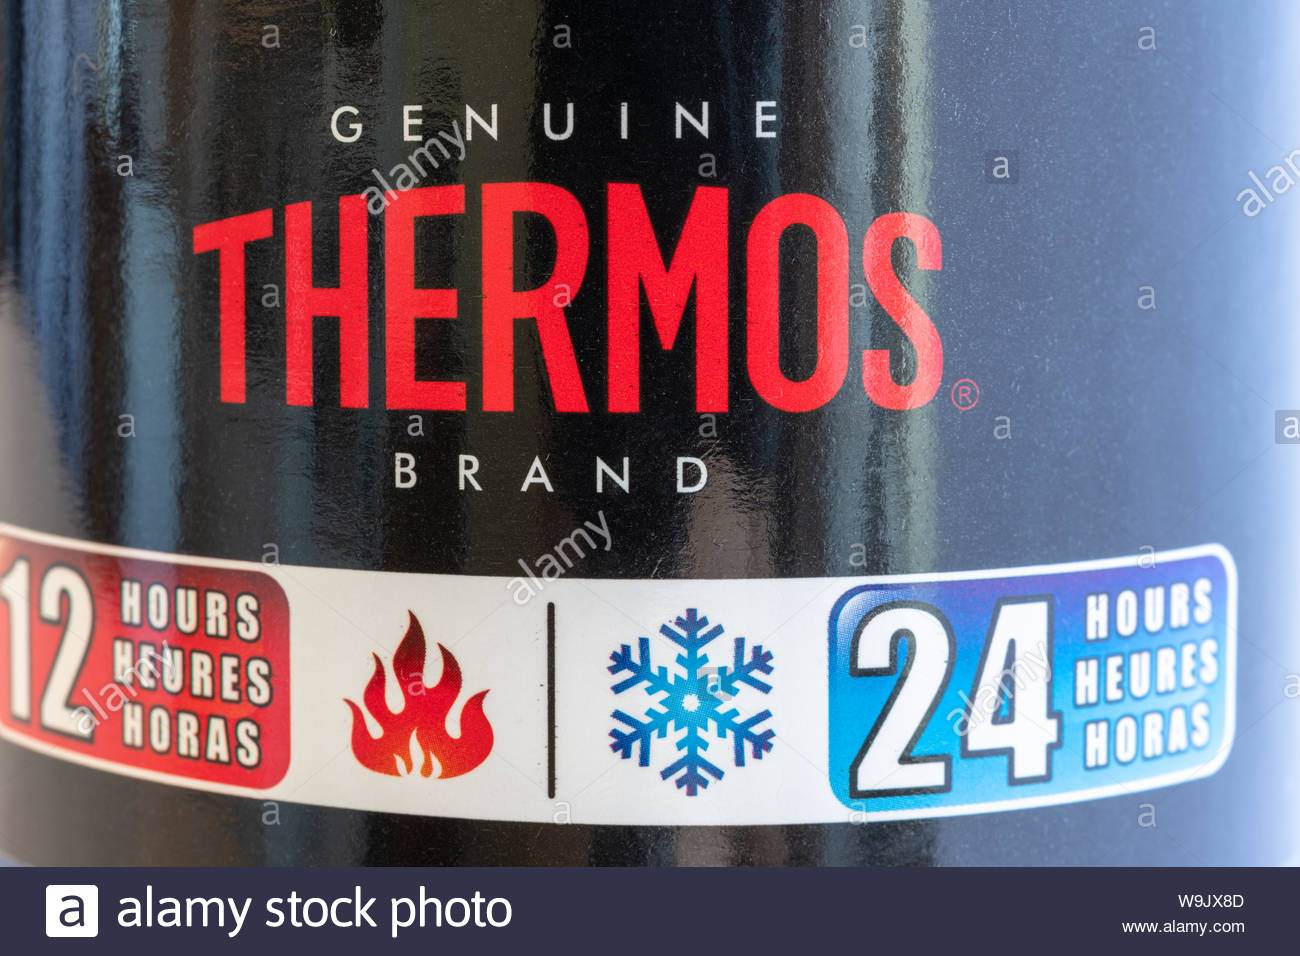 Download In This Illustration Photo A Thermos Brand Name Can Be Seen Over The Surface Of The Temperature Keeping Container Stock Photo Alamy Yellowimages Mockups